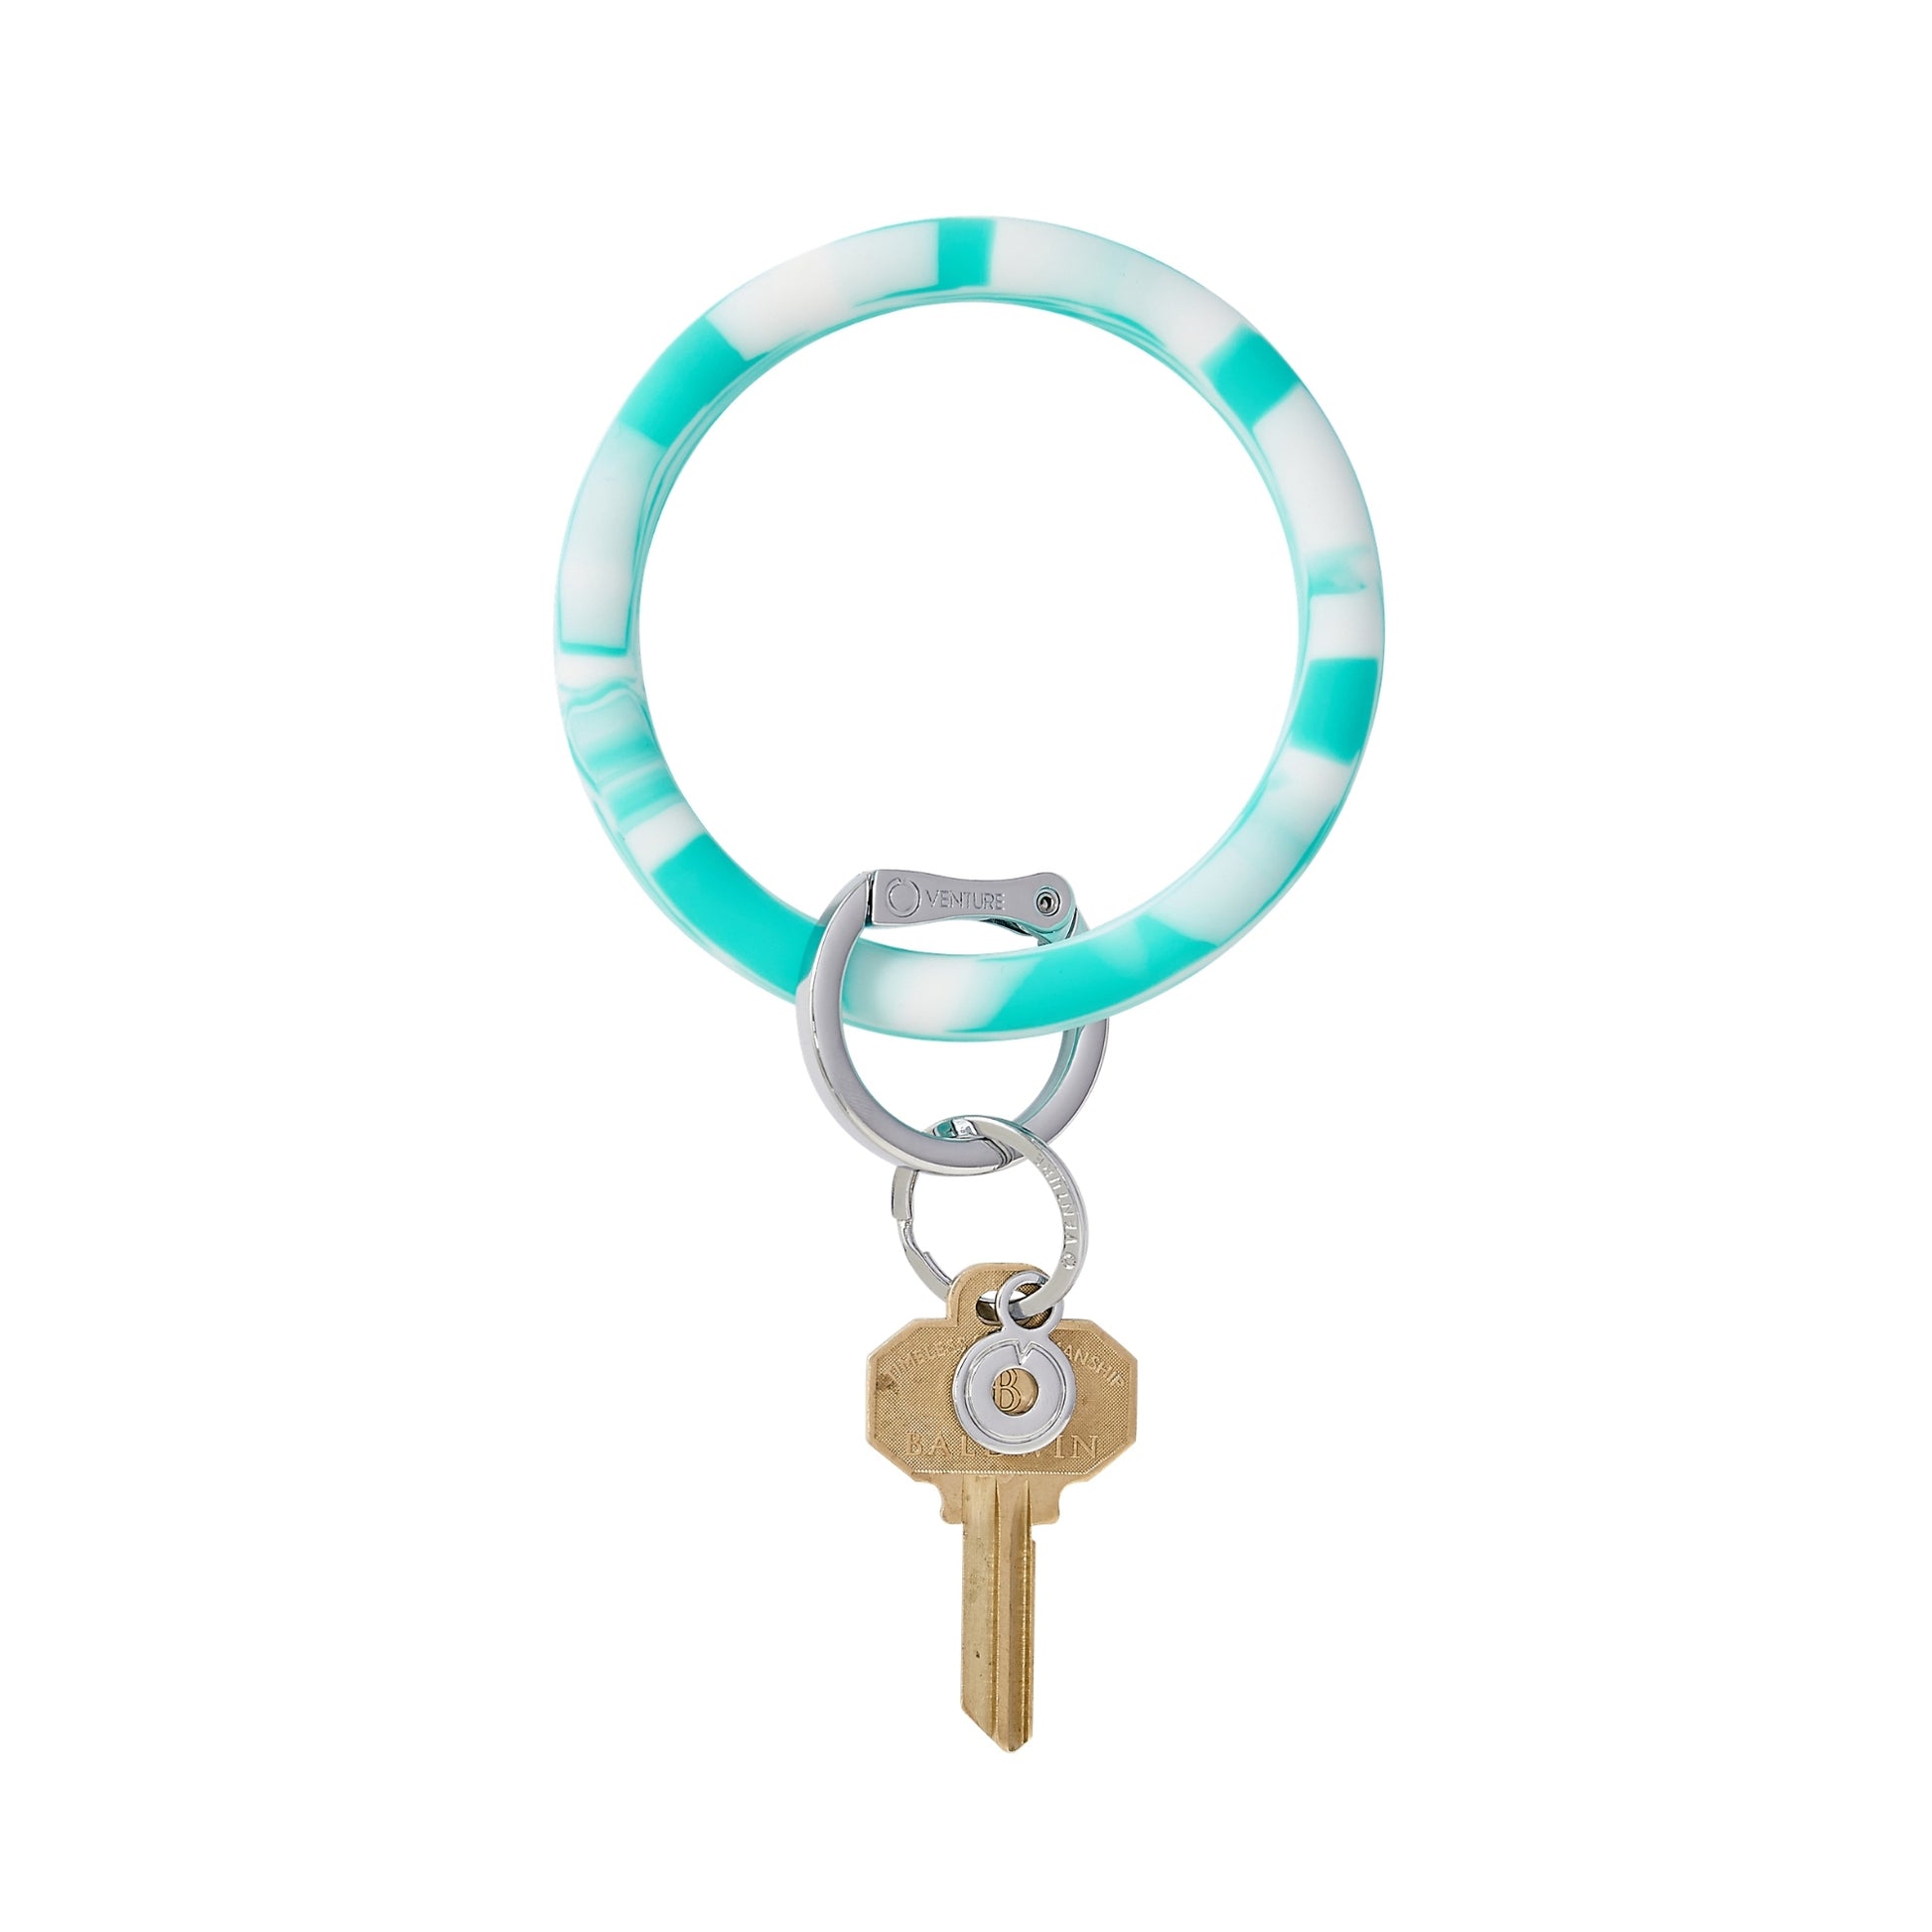 In the Pool Marble - Silicone Big O Key Ring - Oventure is a swirled silicone with two colors mixed. It is a mix of aqua and white silicone